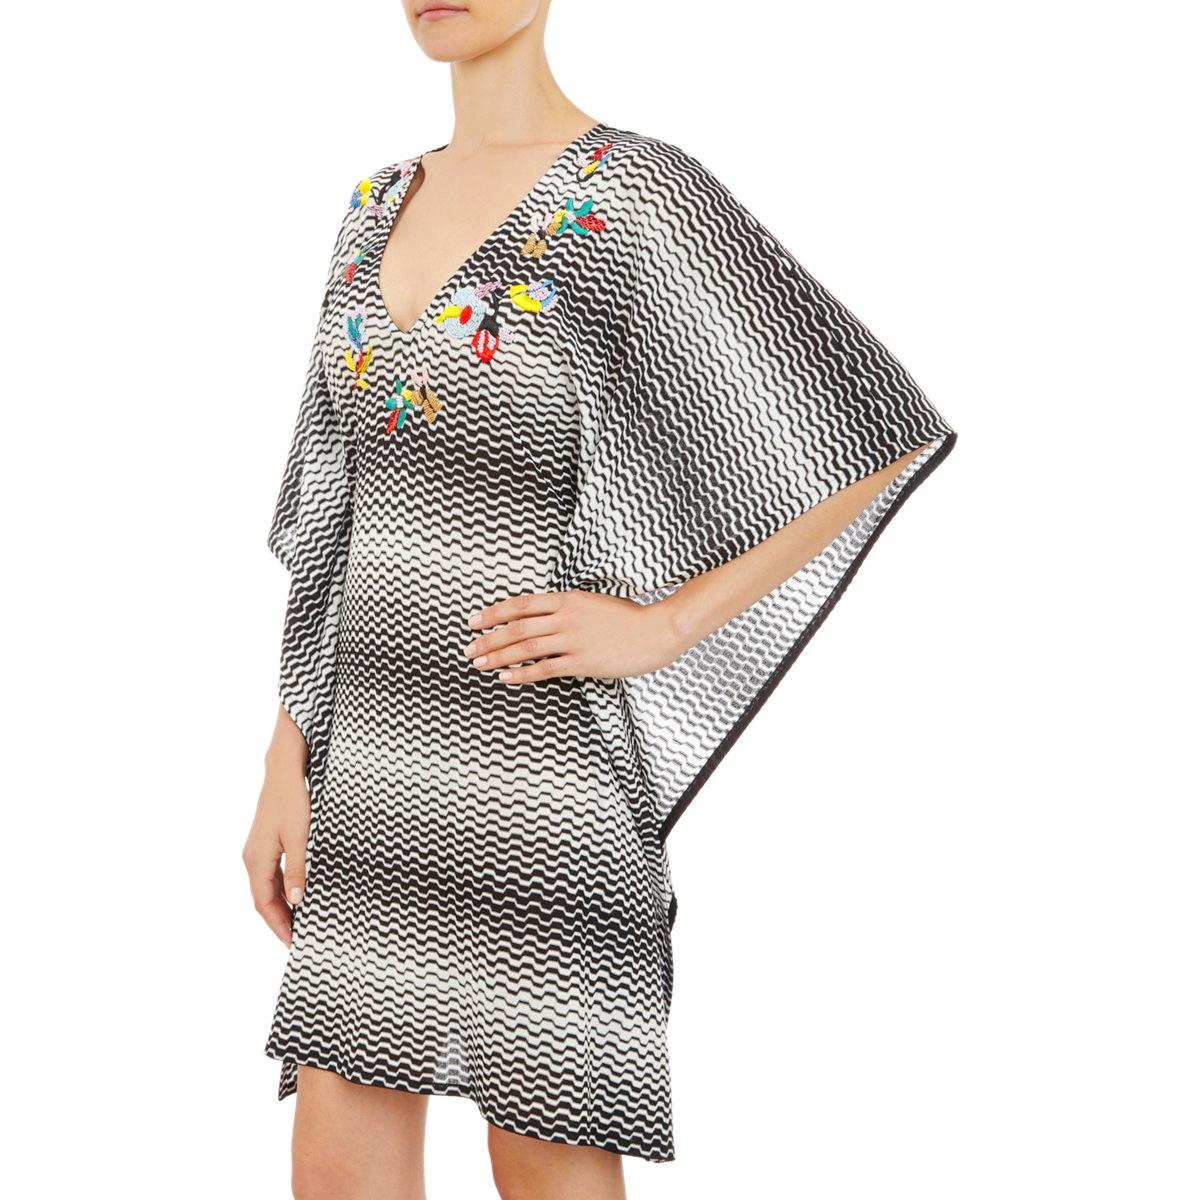 NEW Missoni Hand-Embroidered Chevron Crochet Knit Dress Kaftan Tunic Cover Up 46 For Sale 5